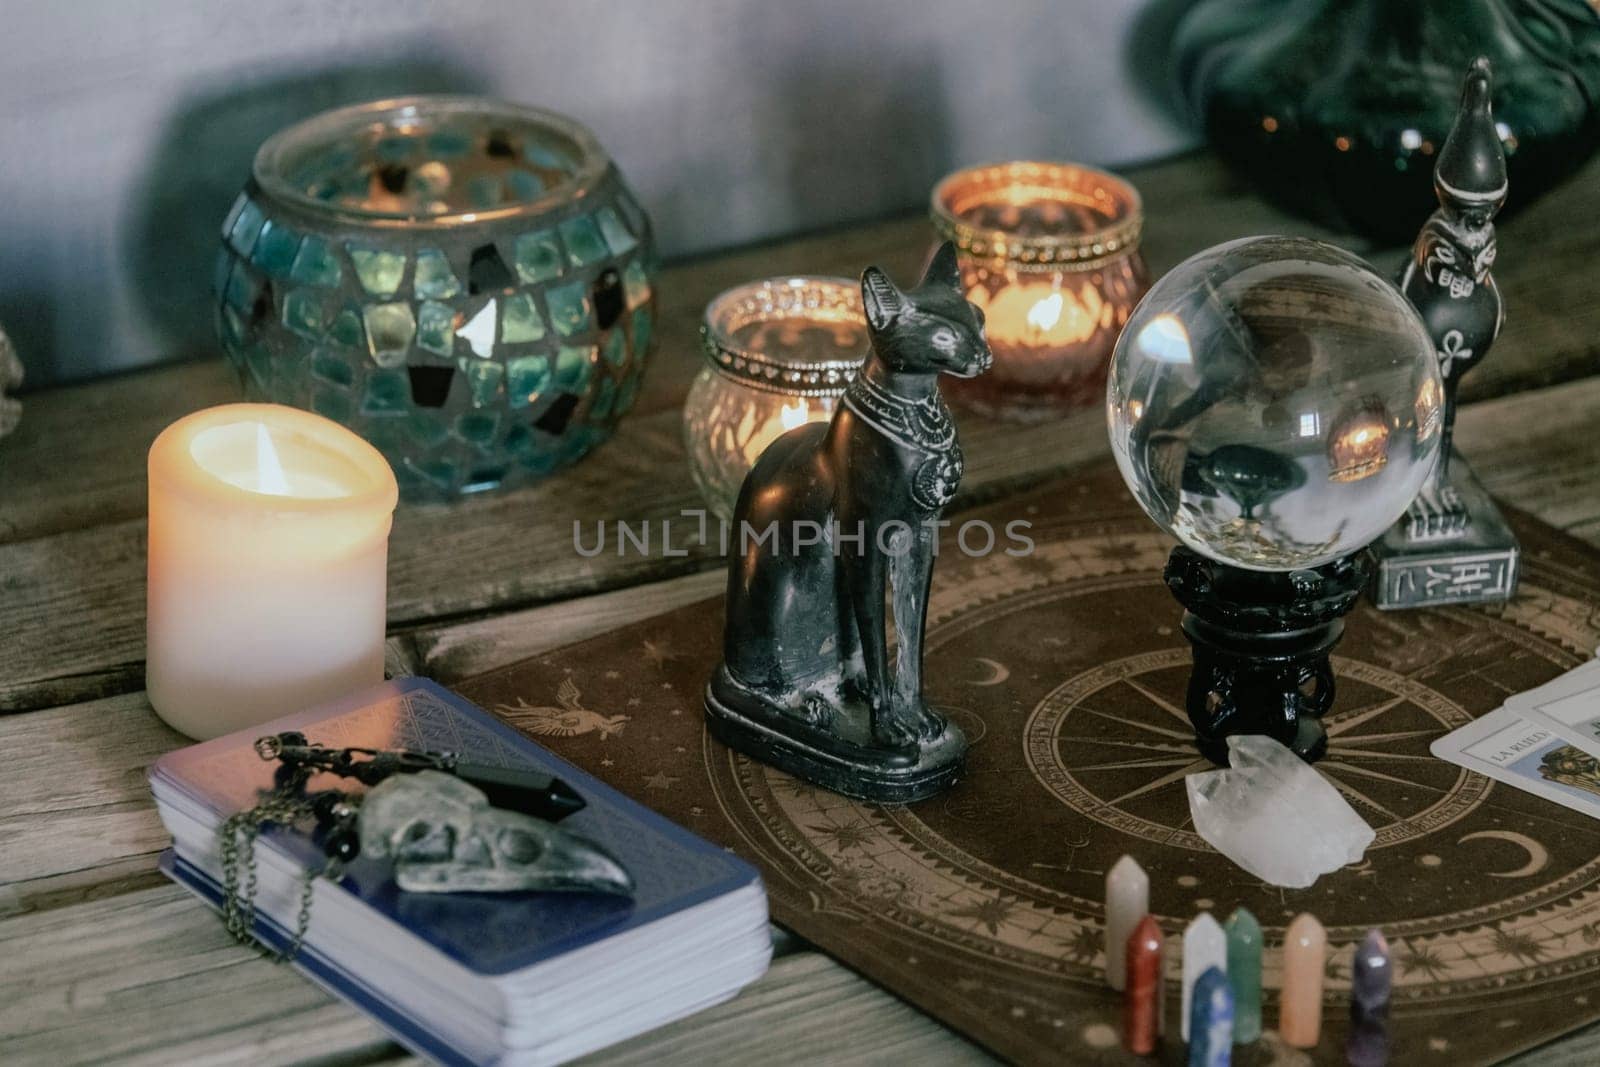 An atmospheric setting featuring a crystal ball, Egyptian cat statues, candles, and crystals, creating a mystical ambiance. by jbruiz78